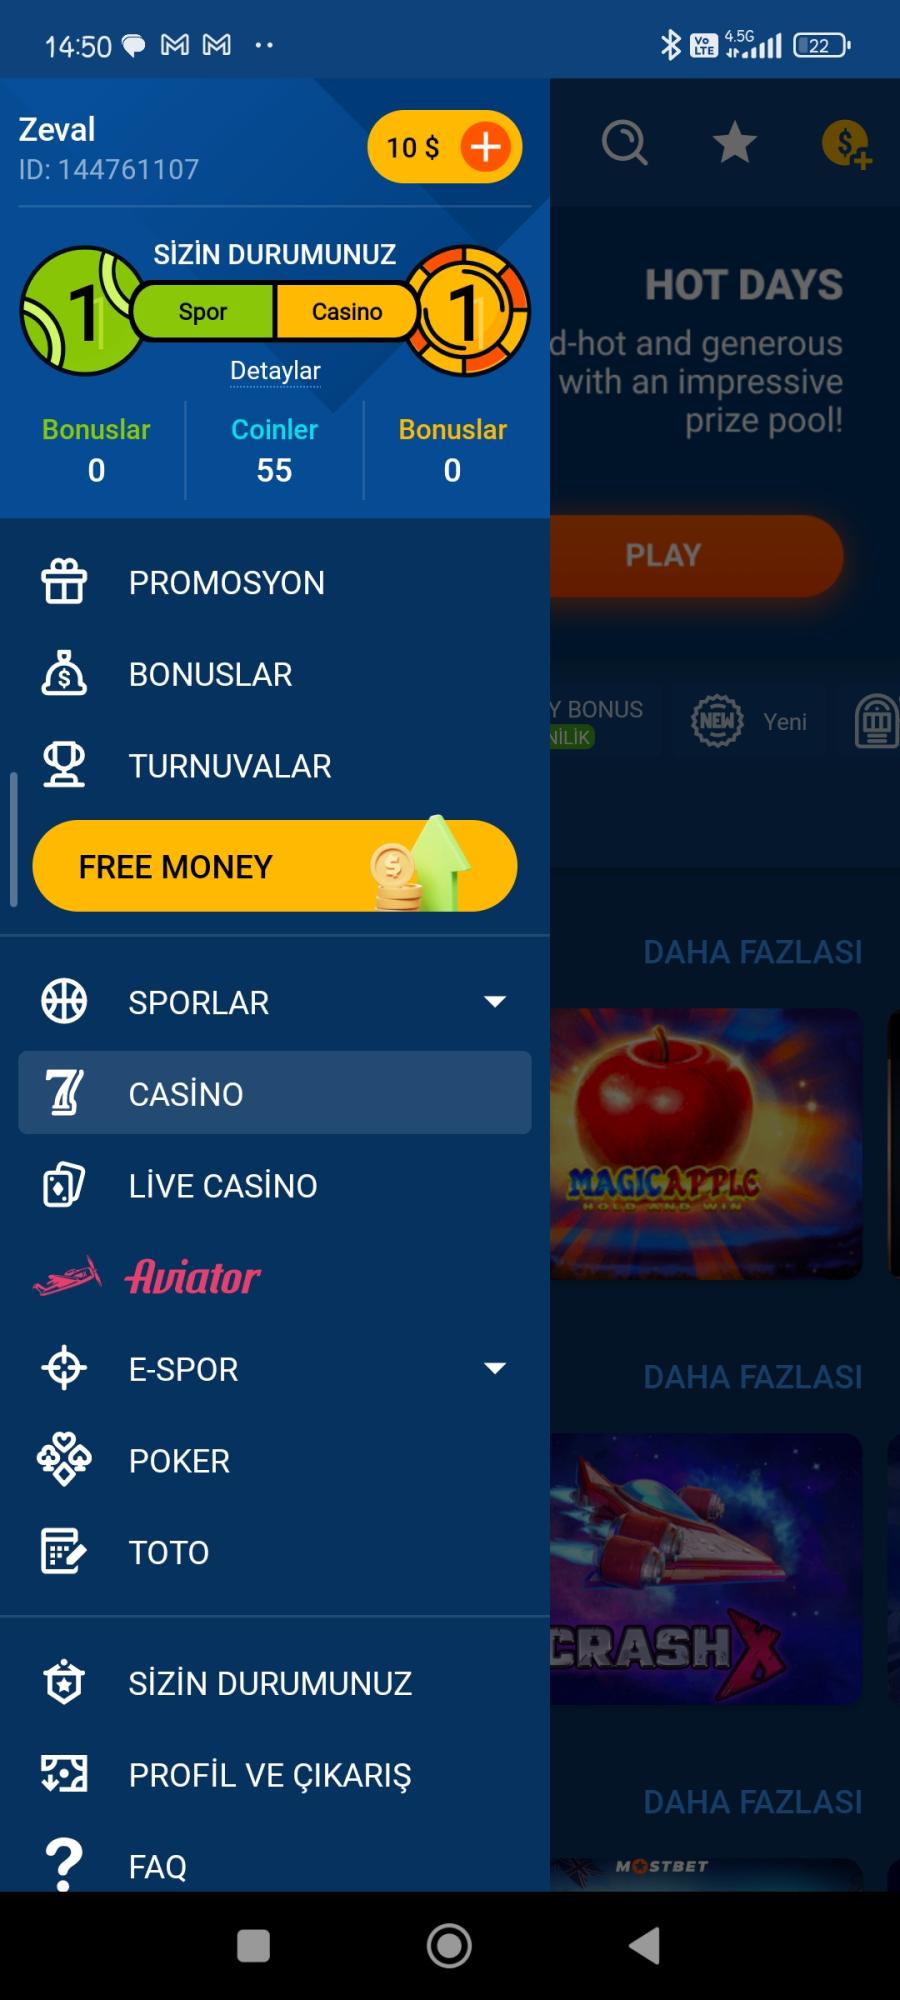 Mostbet App: Your Guide to Downloading, Installing, and Using the Mostbet App